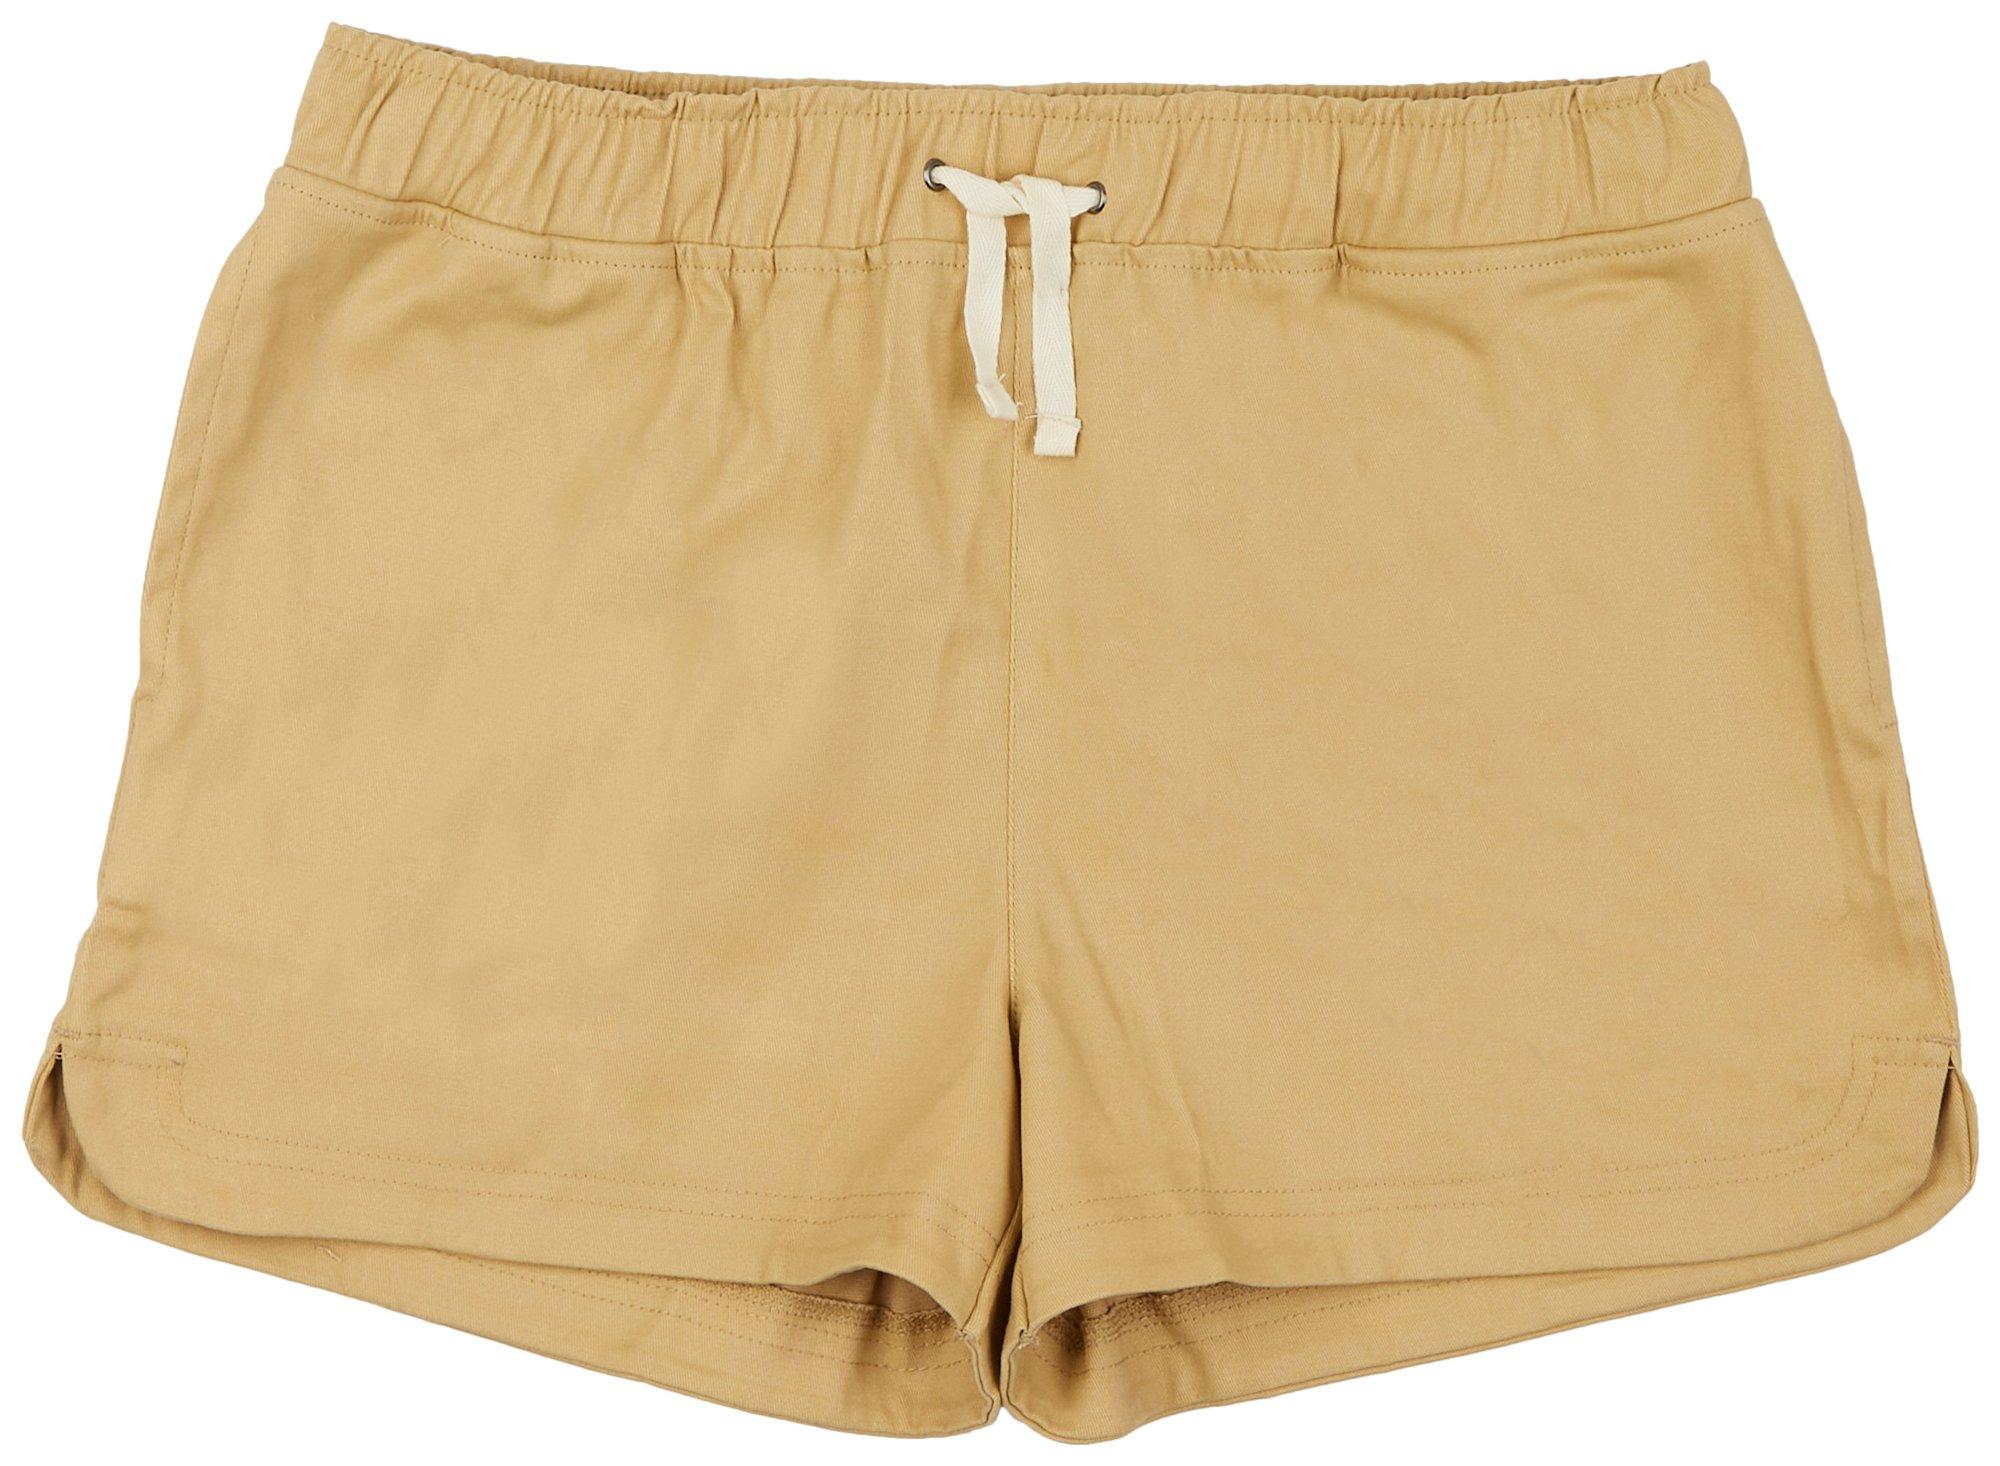 Little Girls Solid Cotton Twill Shorts